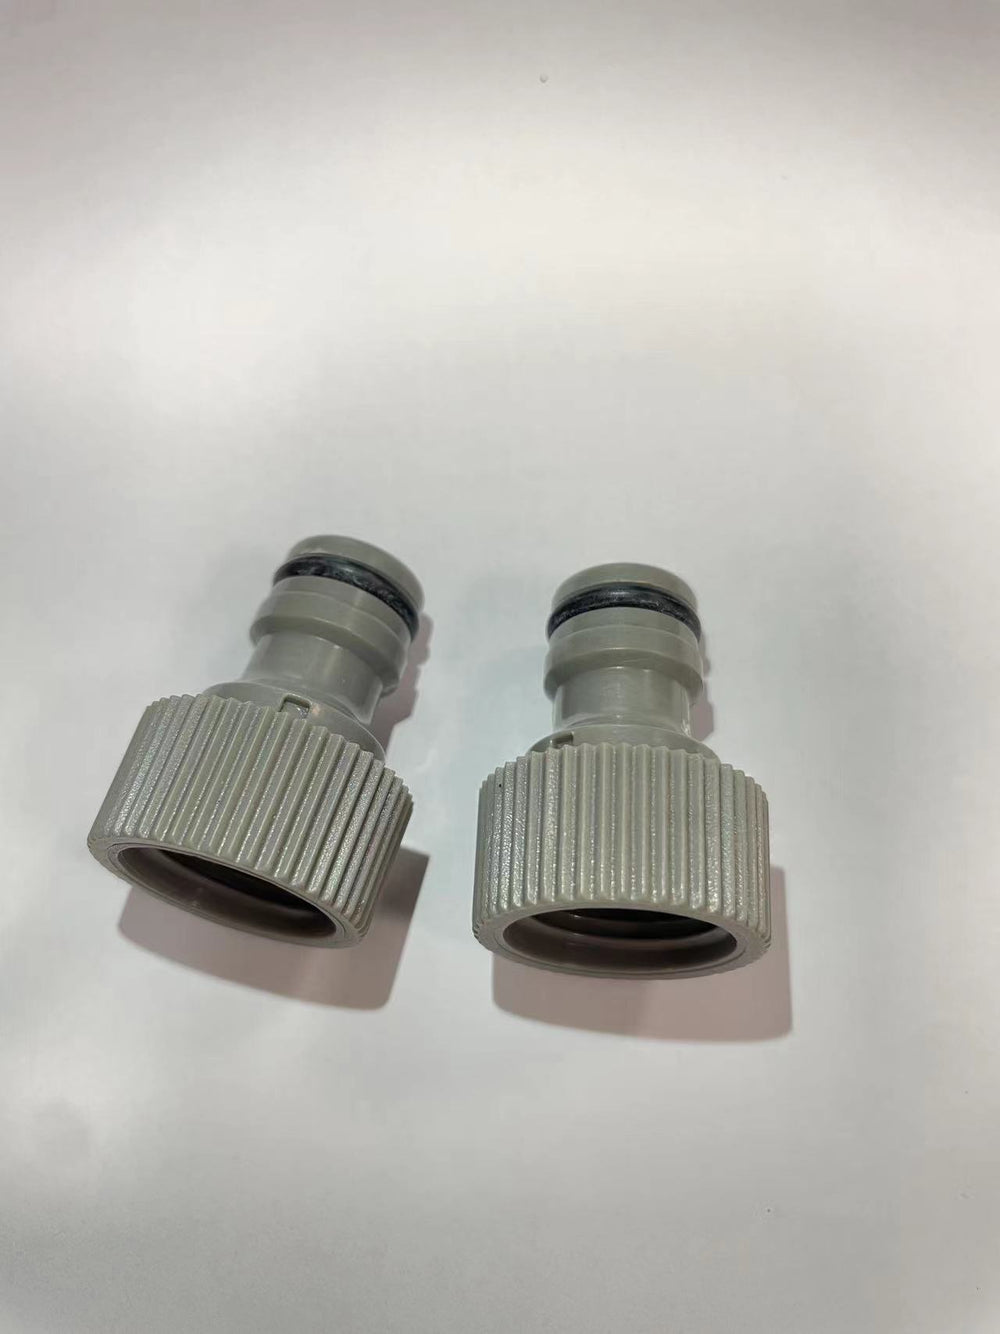 Gardena Official The and Store REACH-iT Connectors – Pushfits